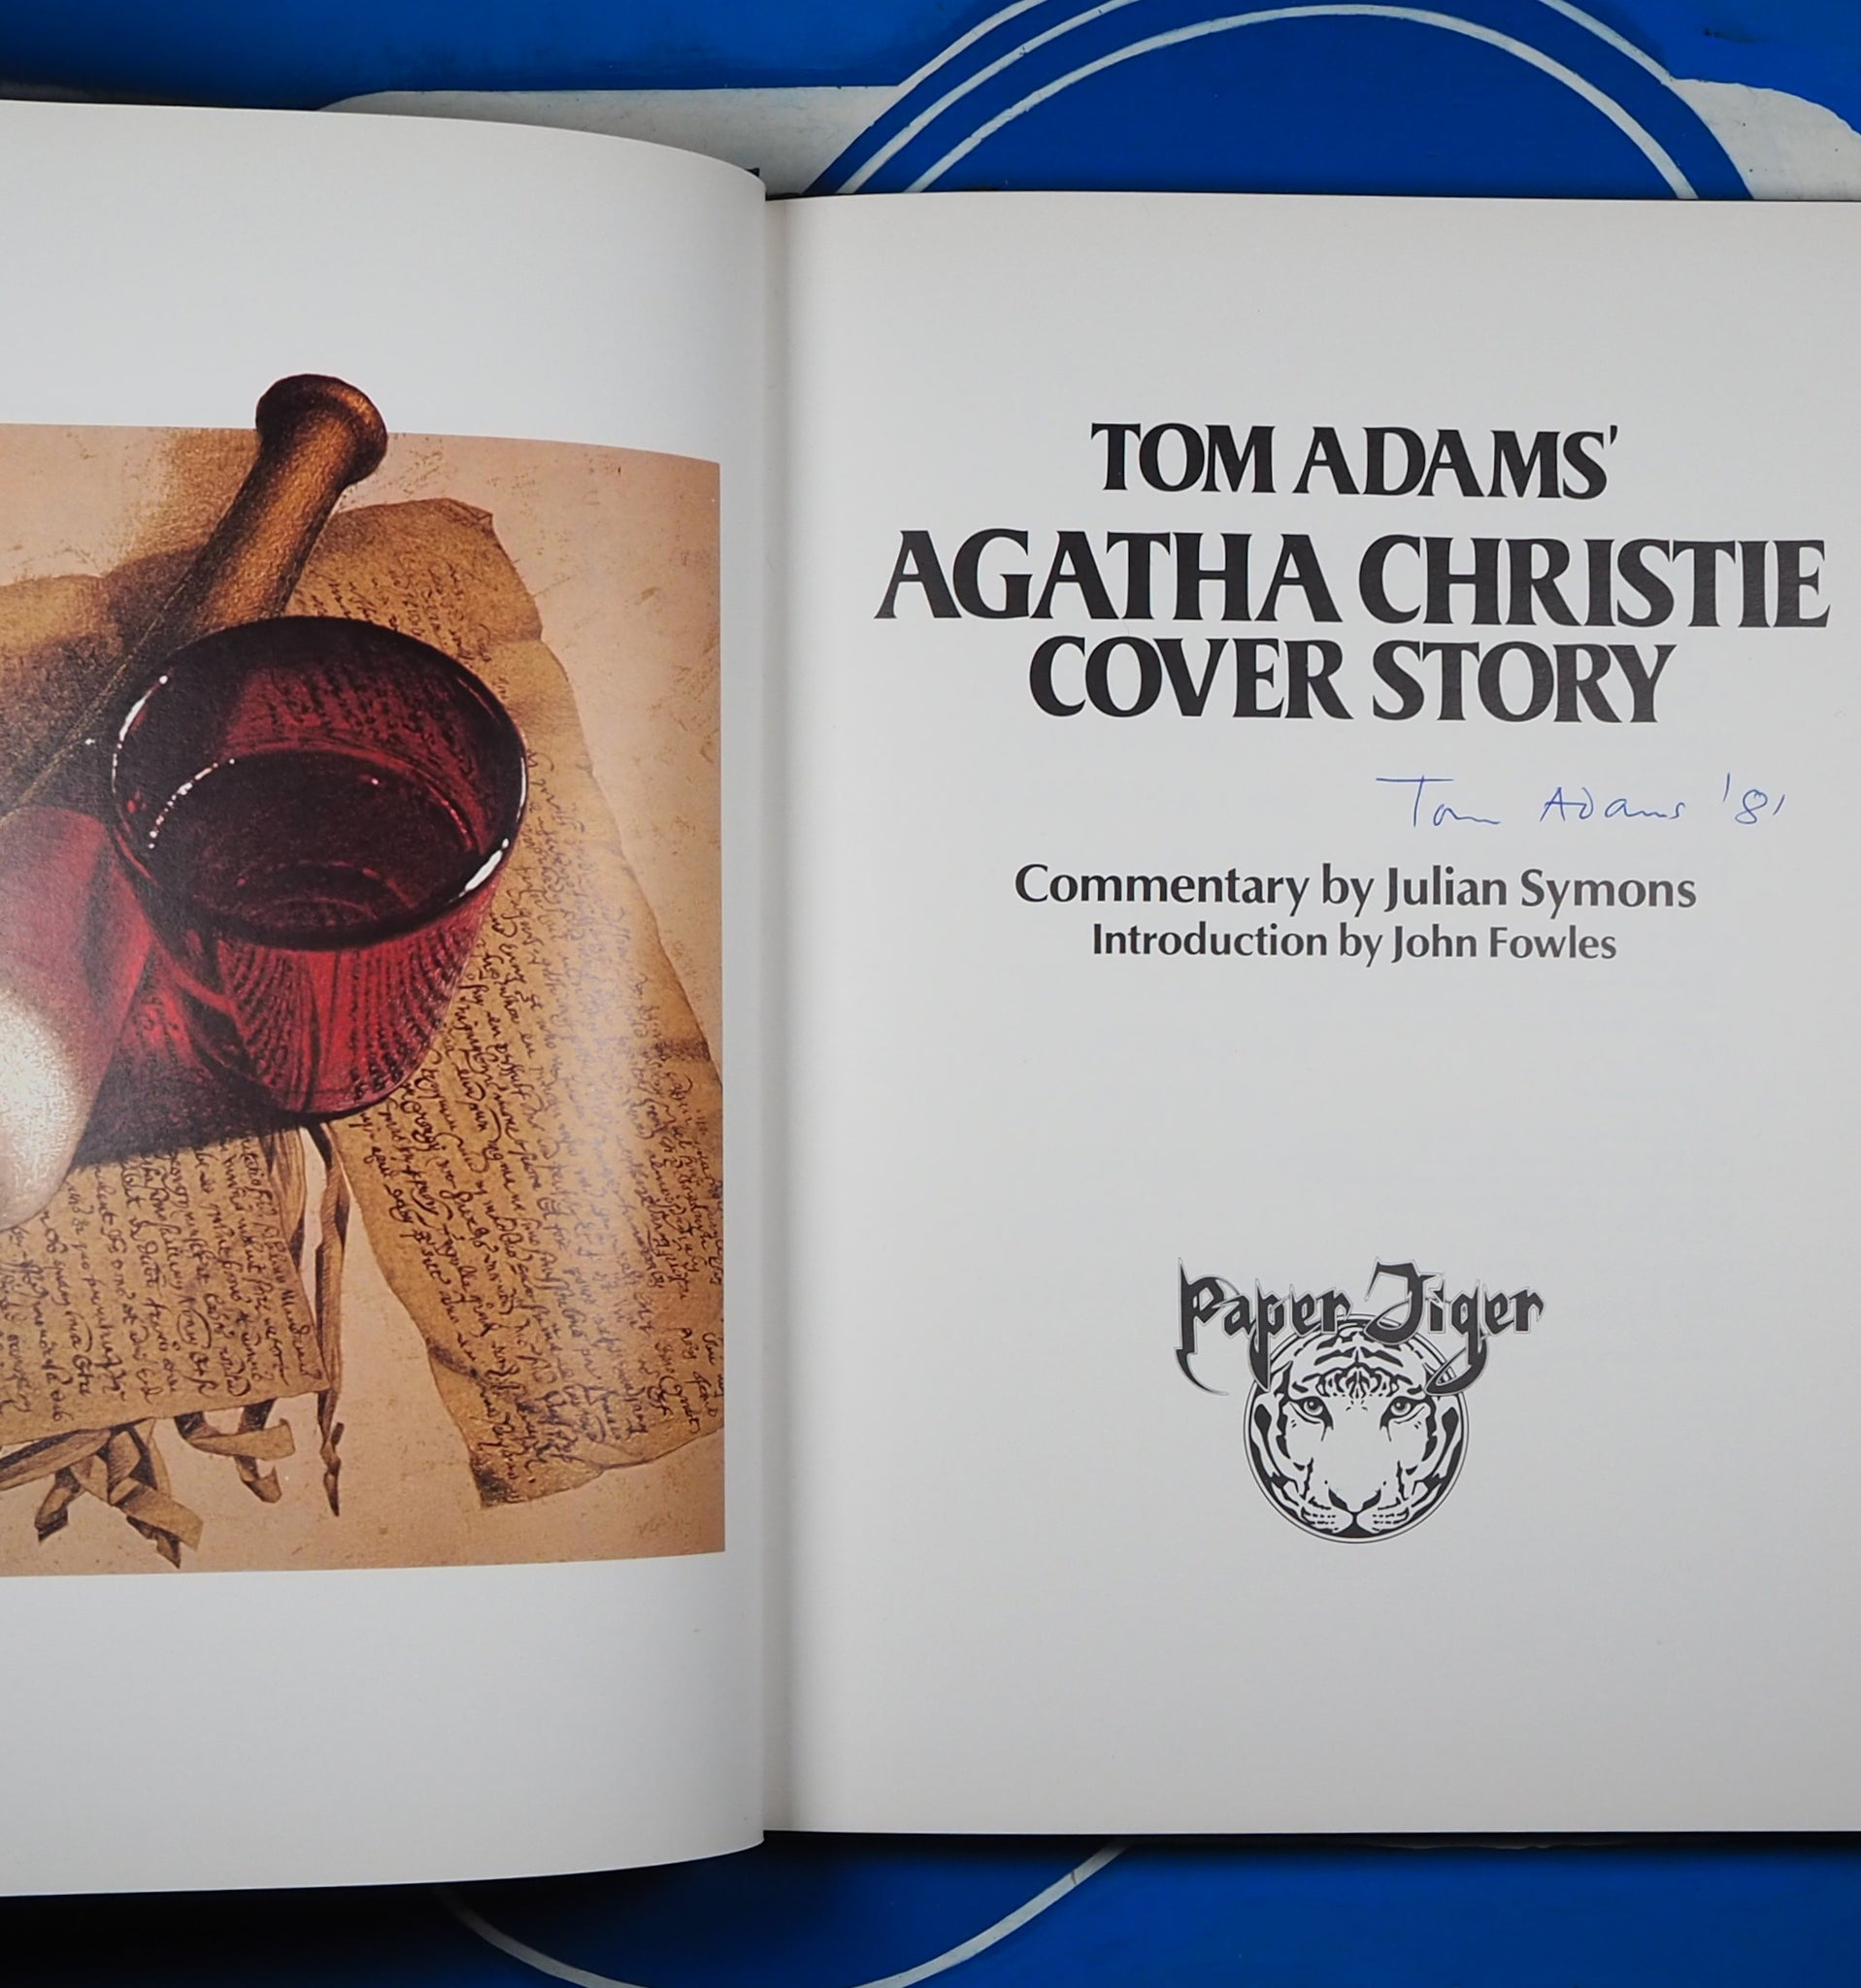 Tom Adams' Agatha Christie cover story. >>SIGNED BY